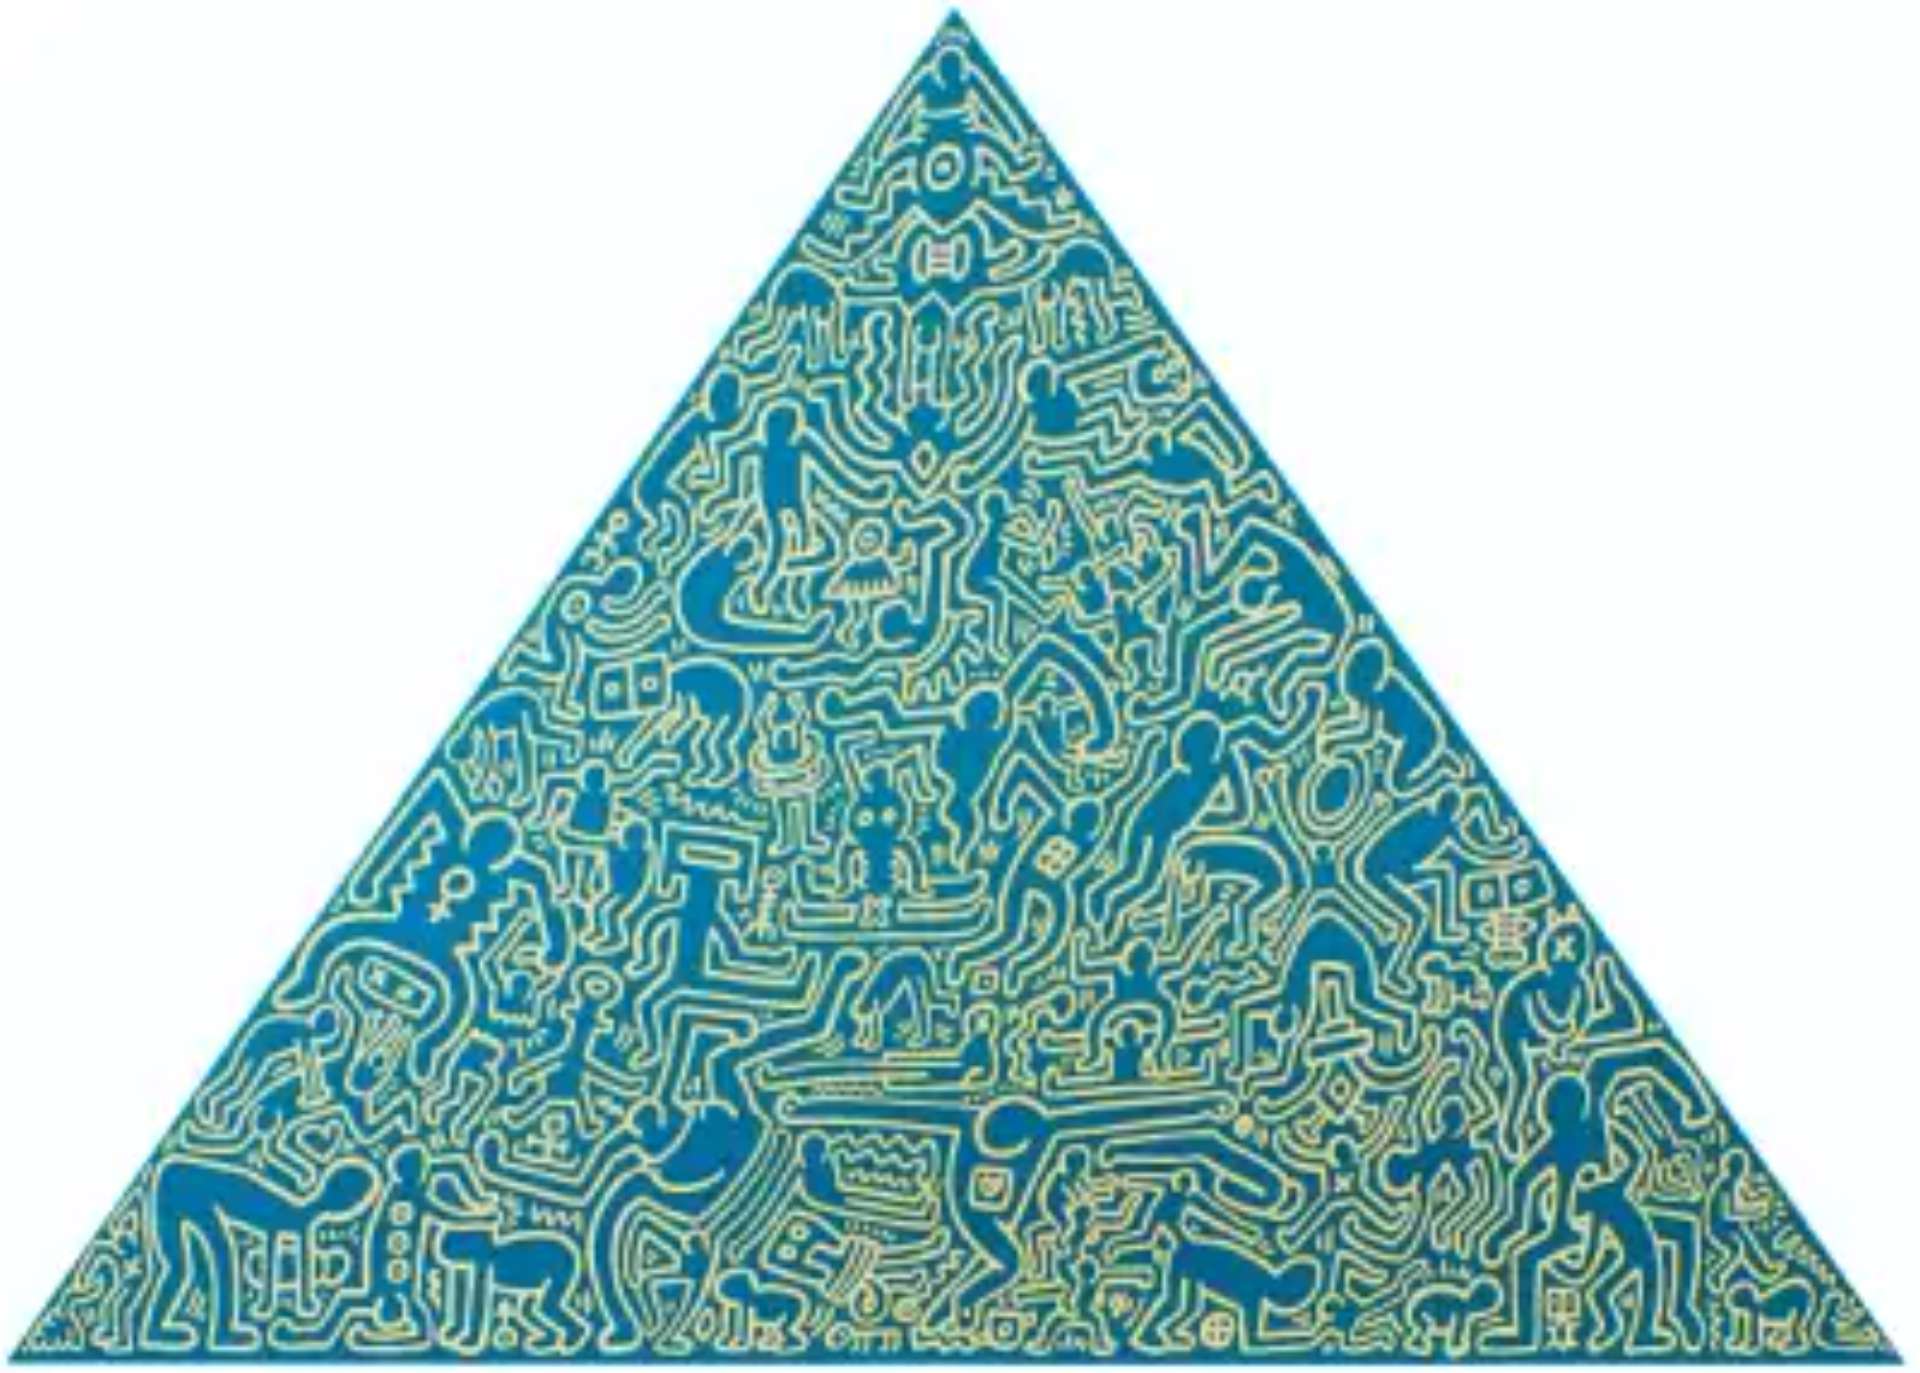 Pyramid (blue II) by Keith Haring